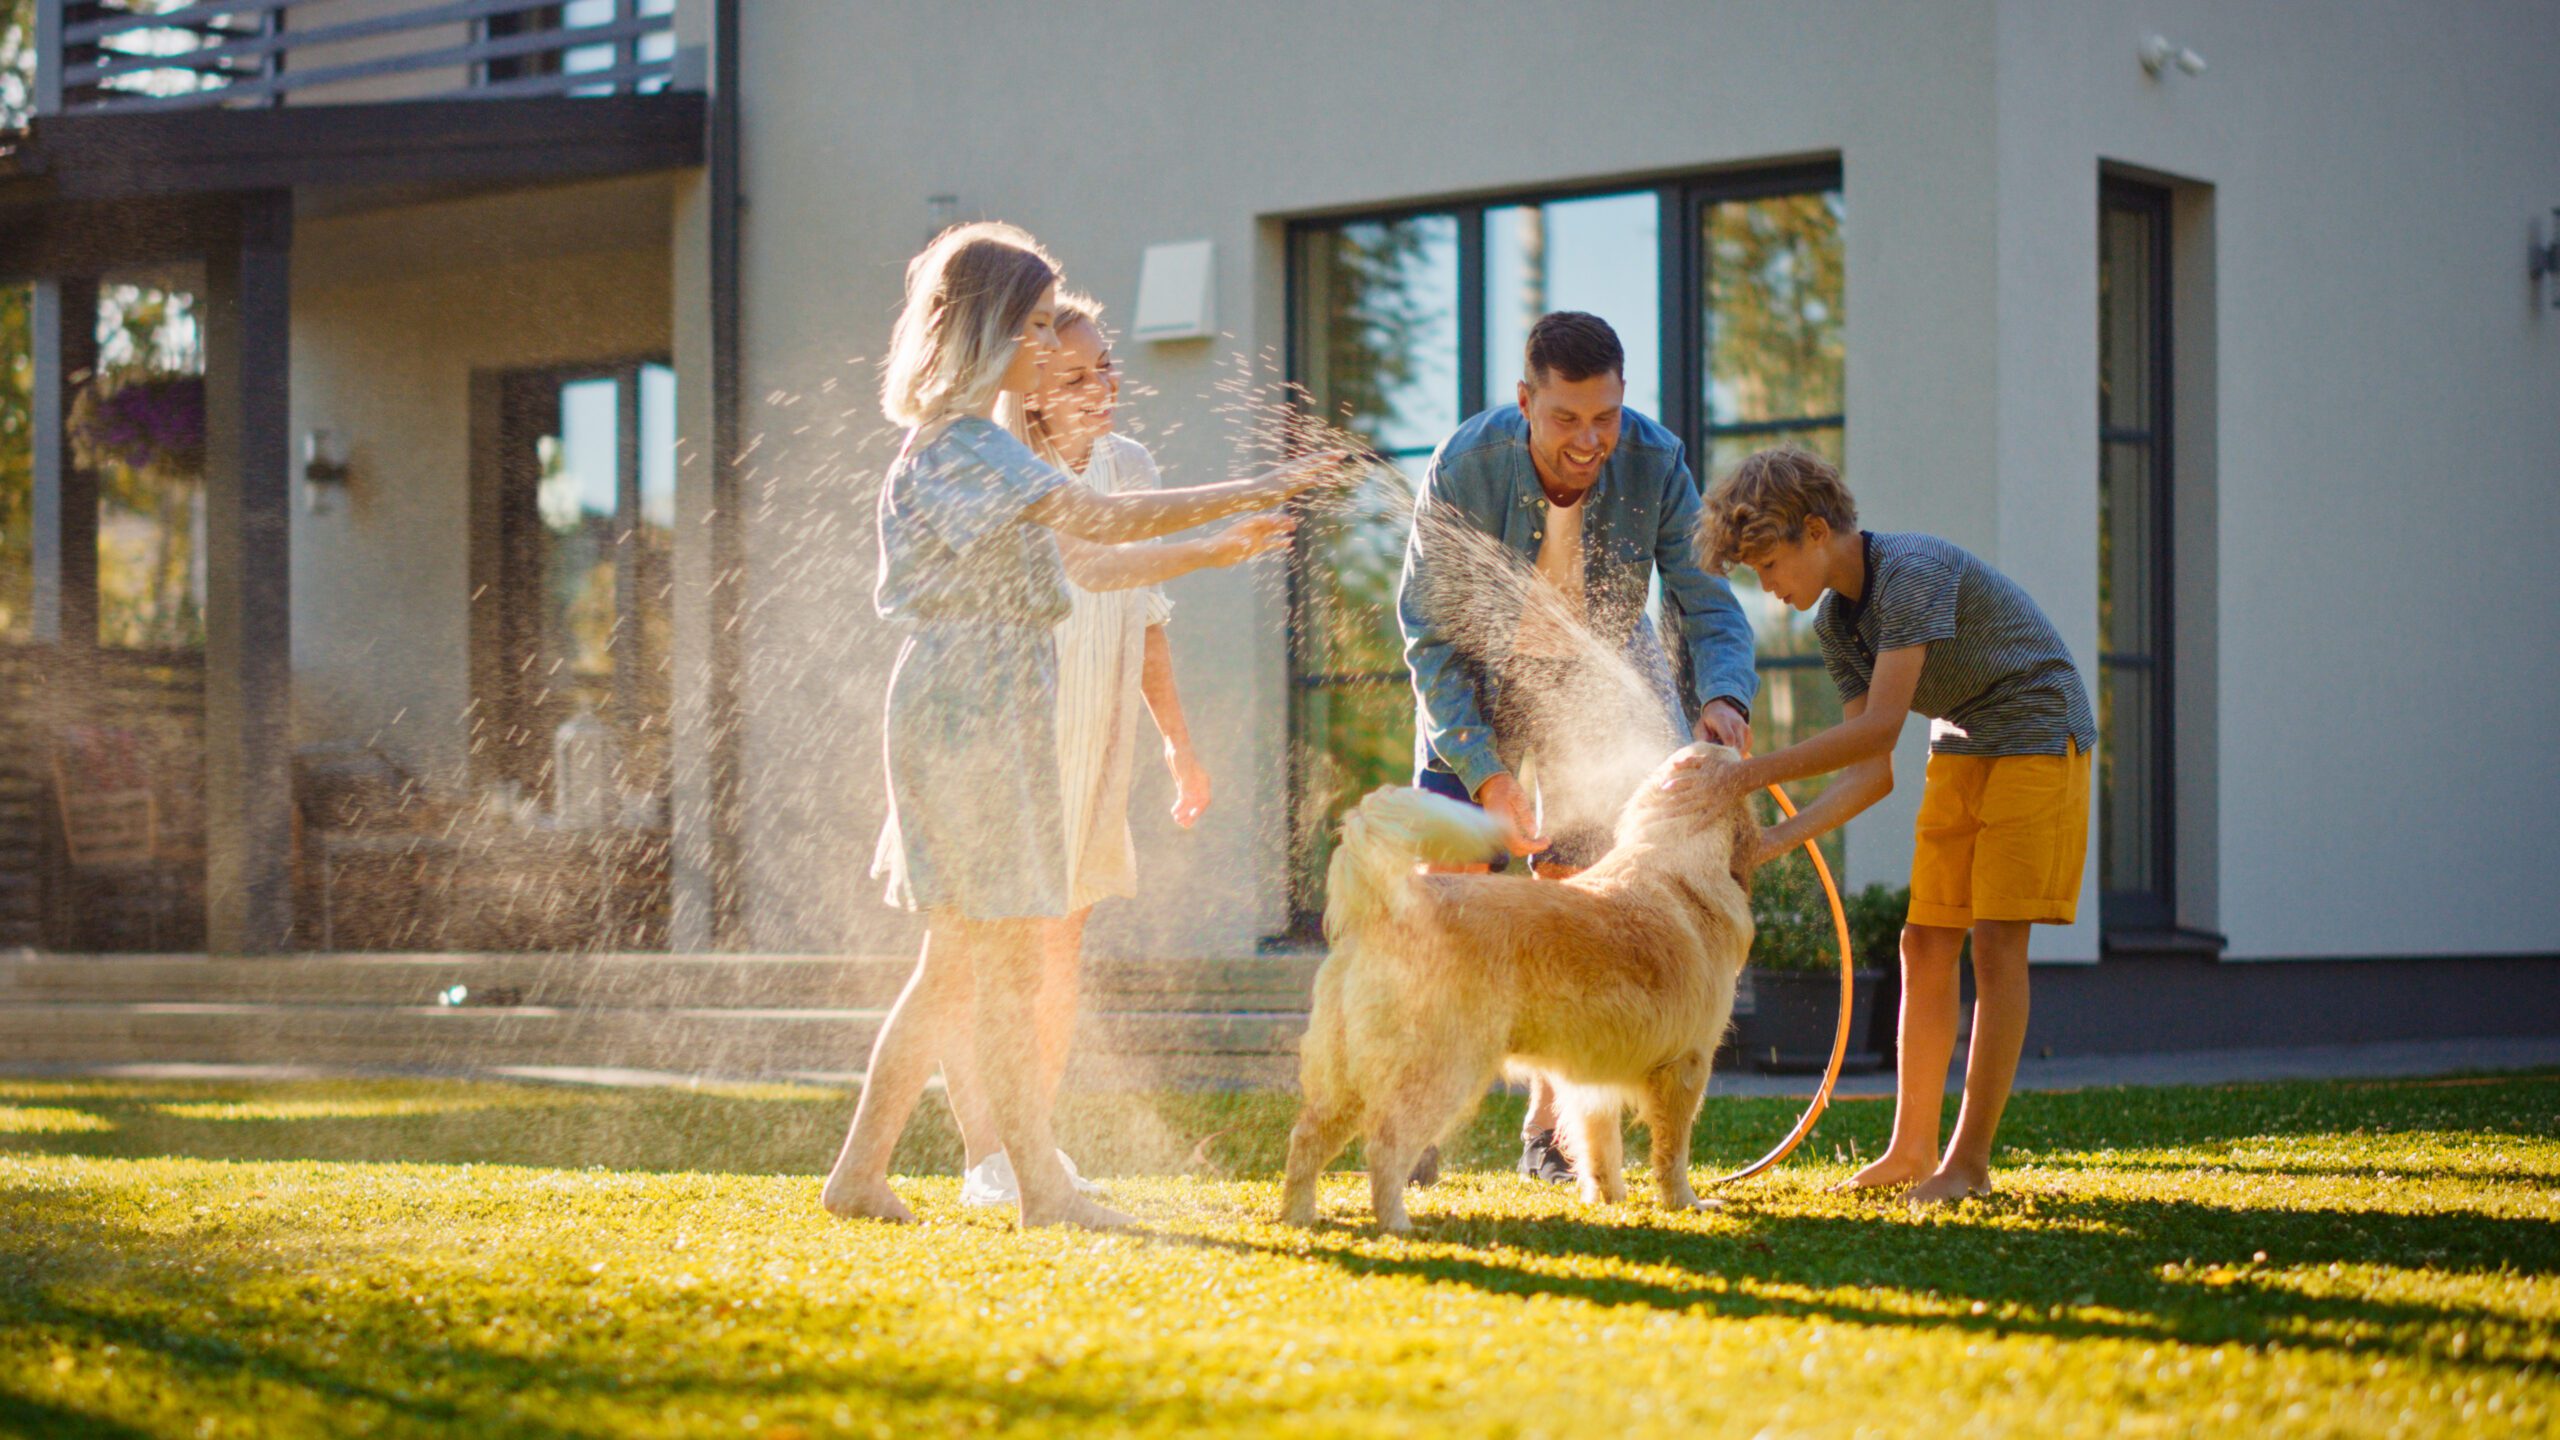 Family with water hose